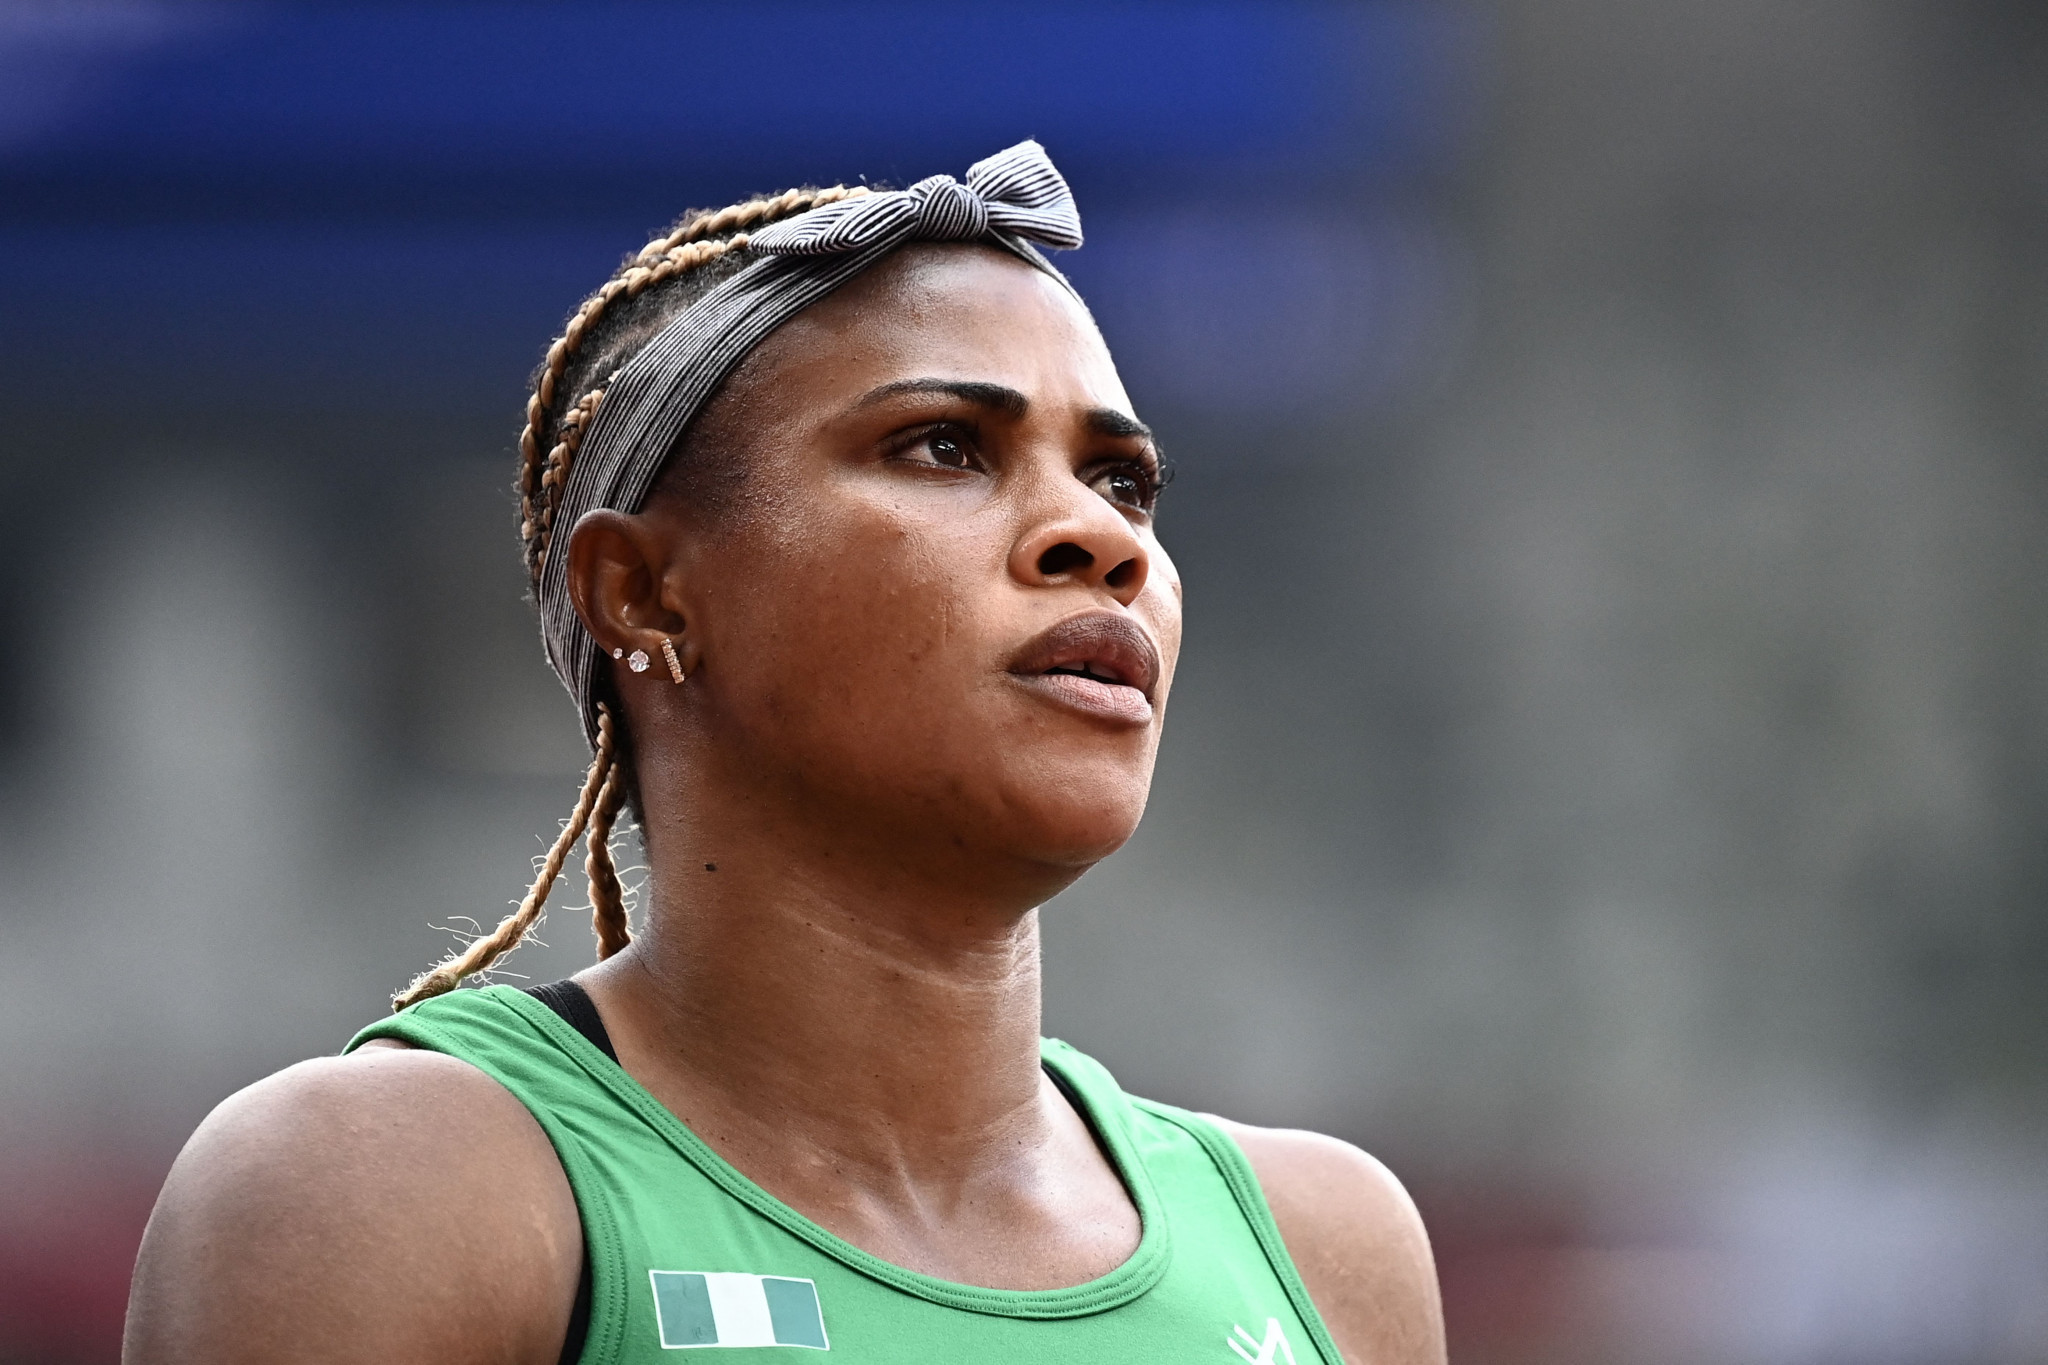 Nigeria women's 4x100m team out of World Championships after fresh Okagbare ban